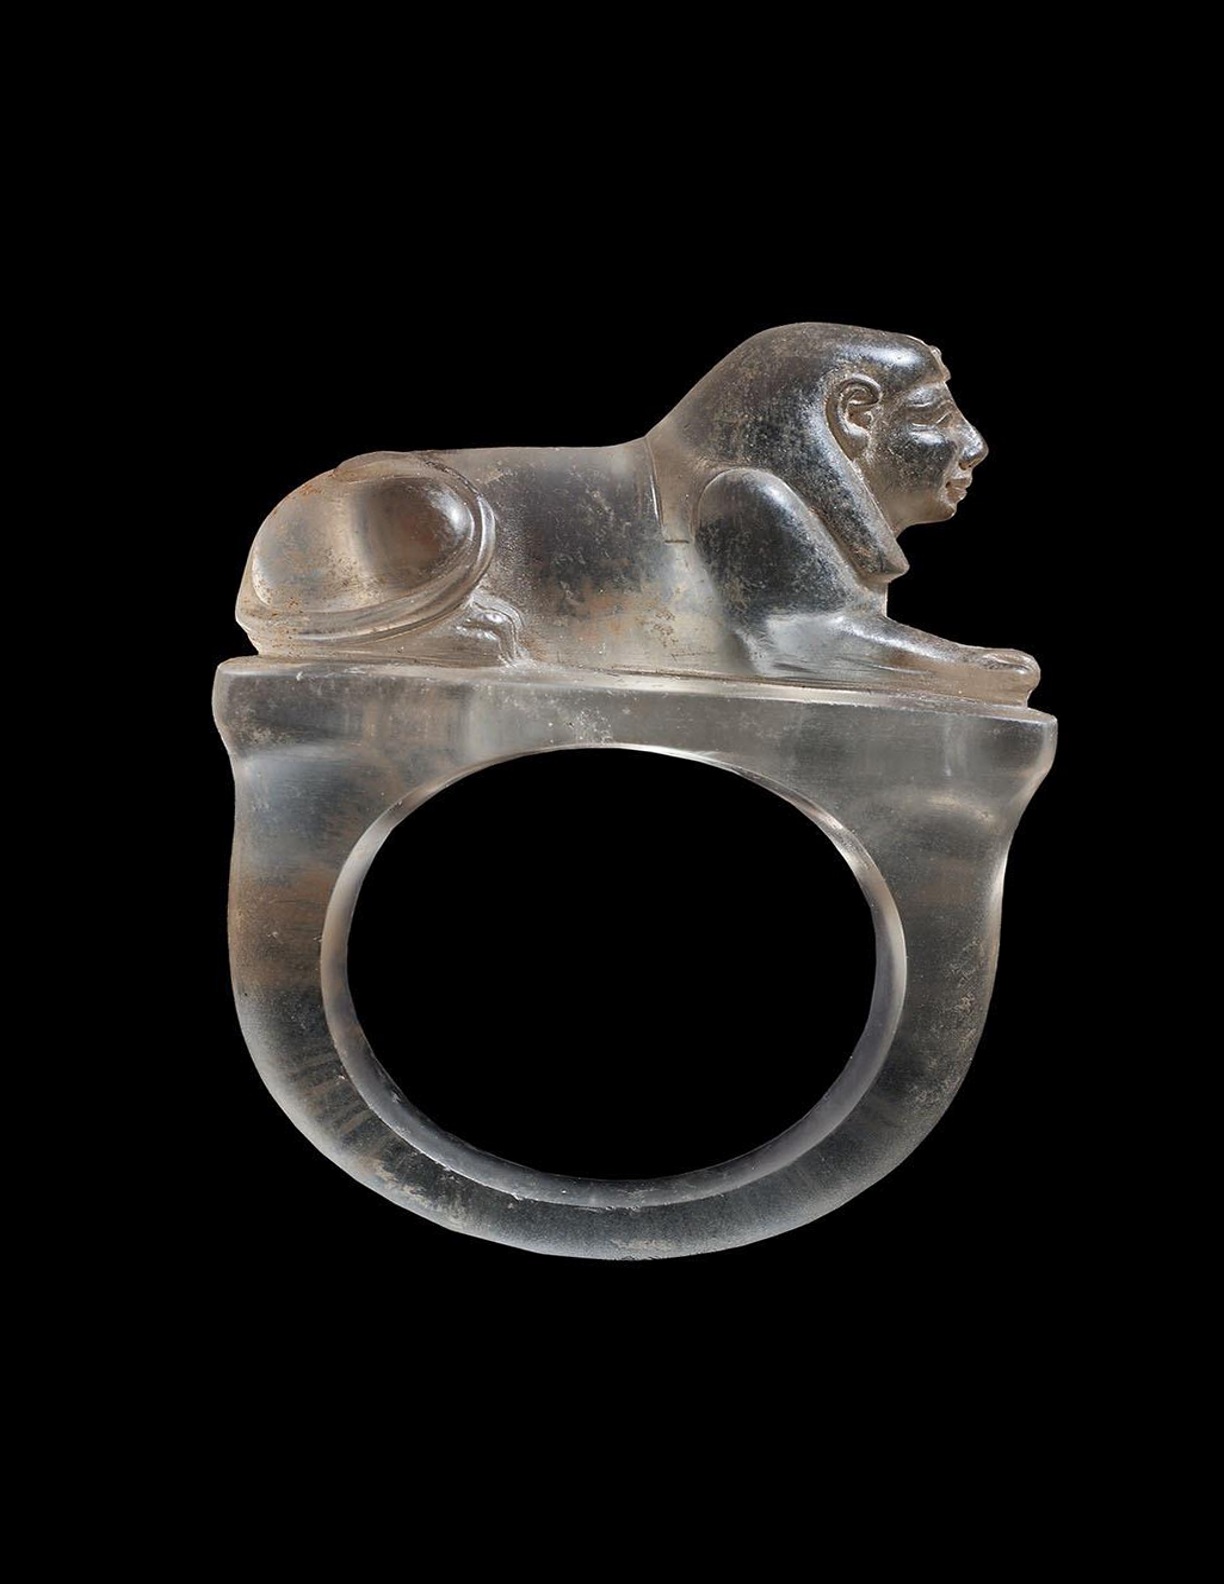 Ancient Egyptian rock crystal ring, carved into the shape of a sphinx. The ring dates to the 19th-20th dynasty, or 1295-1069 BCE.jpg